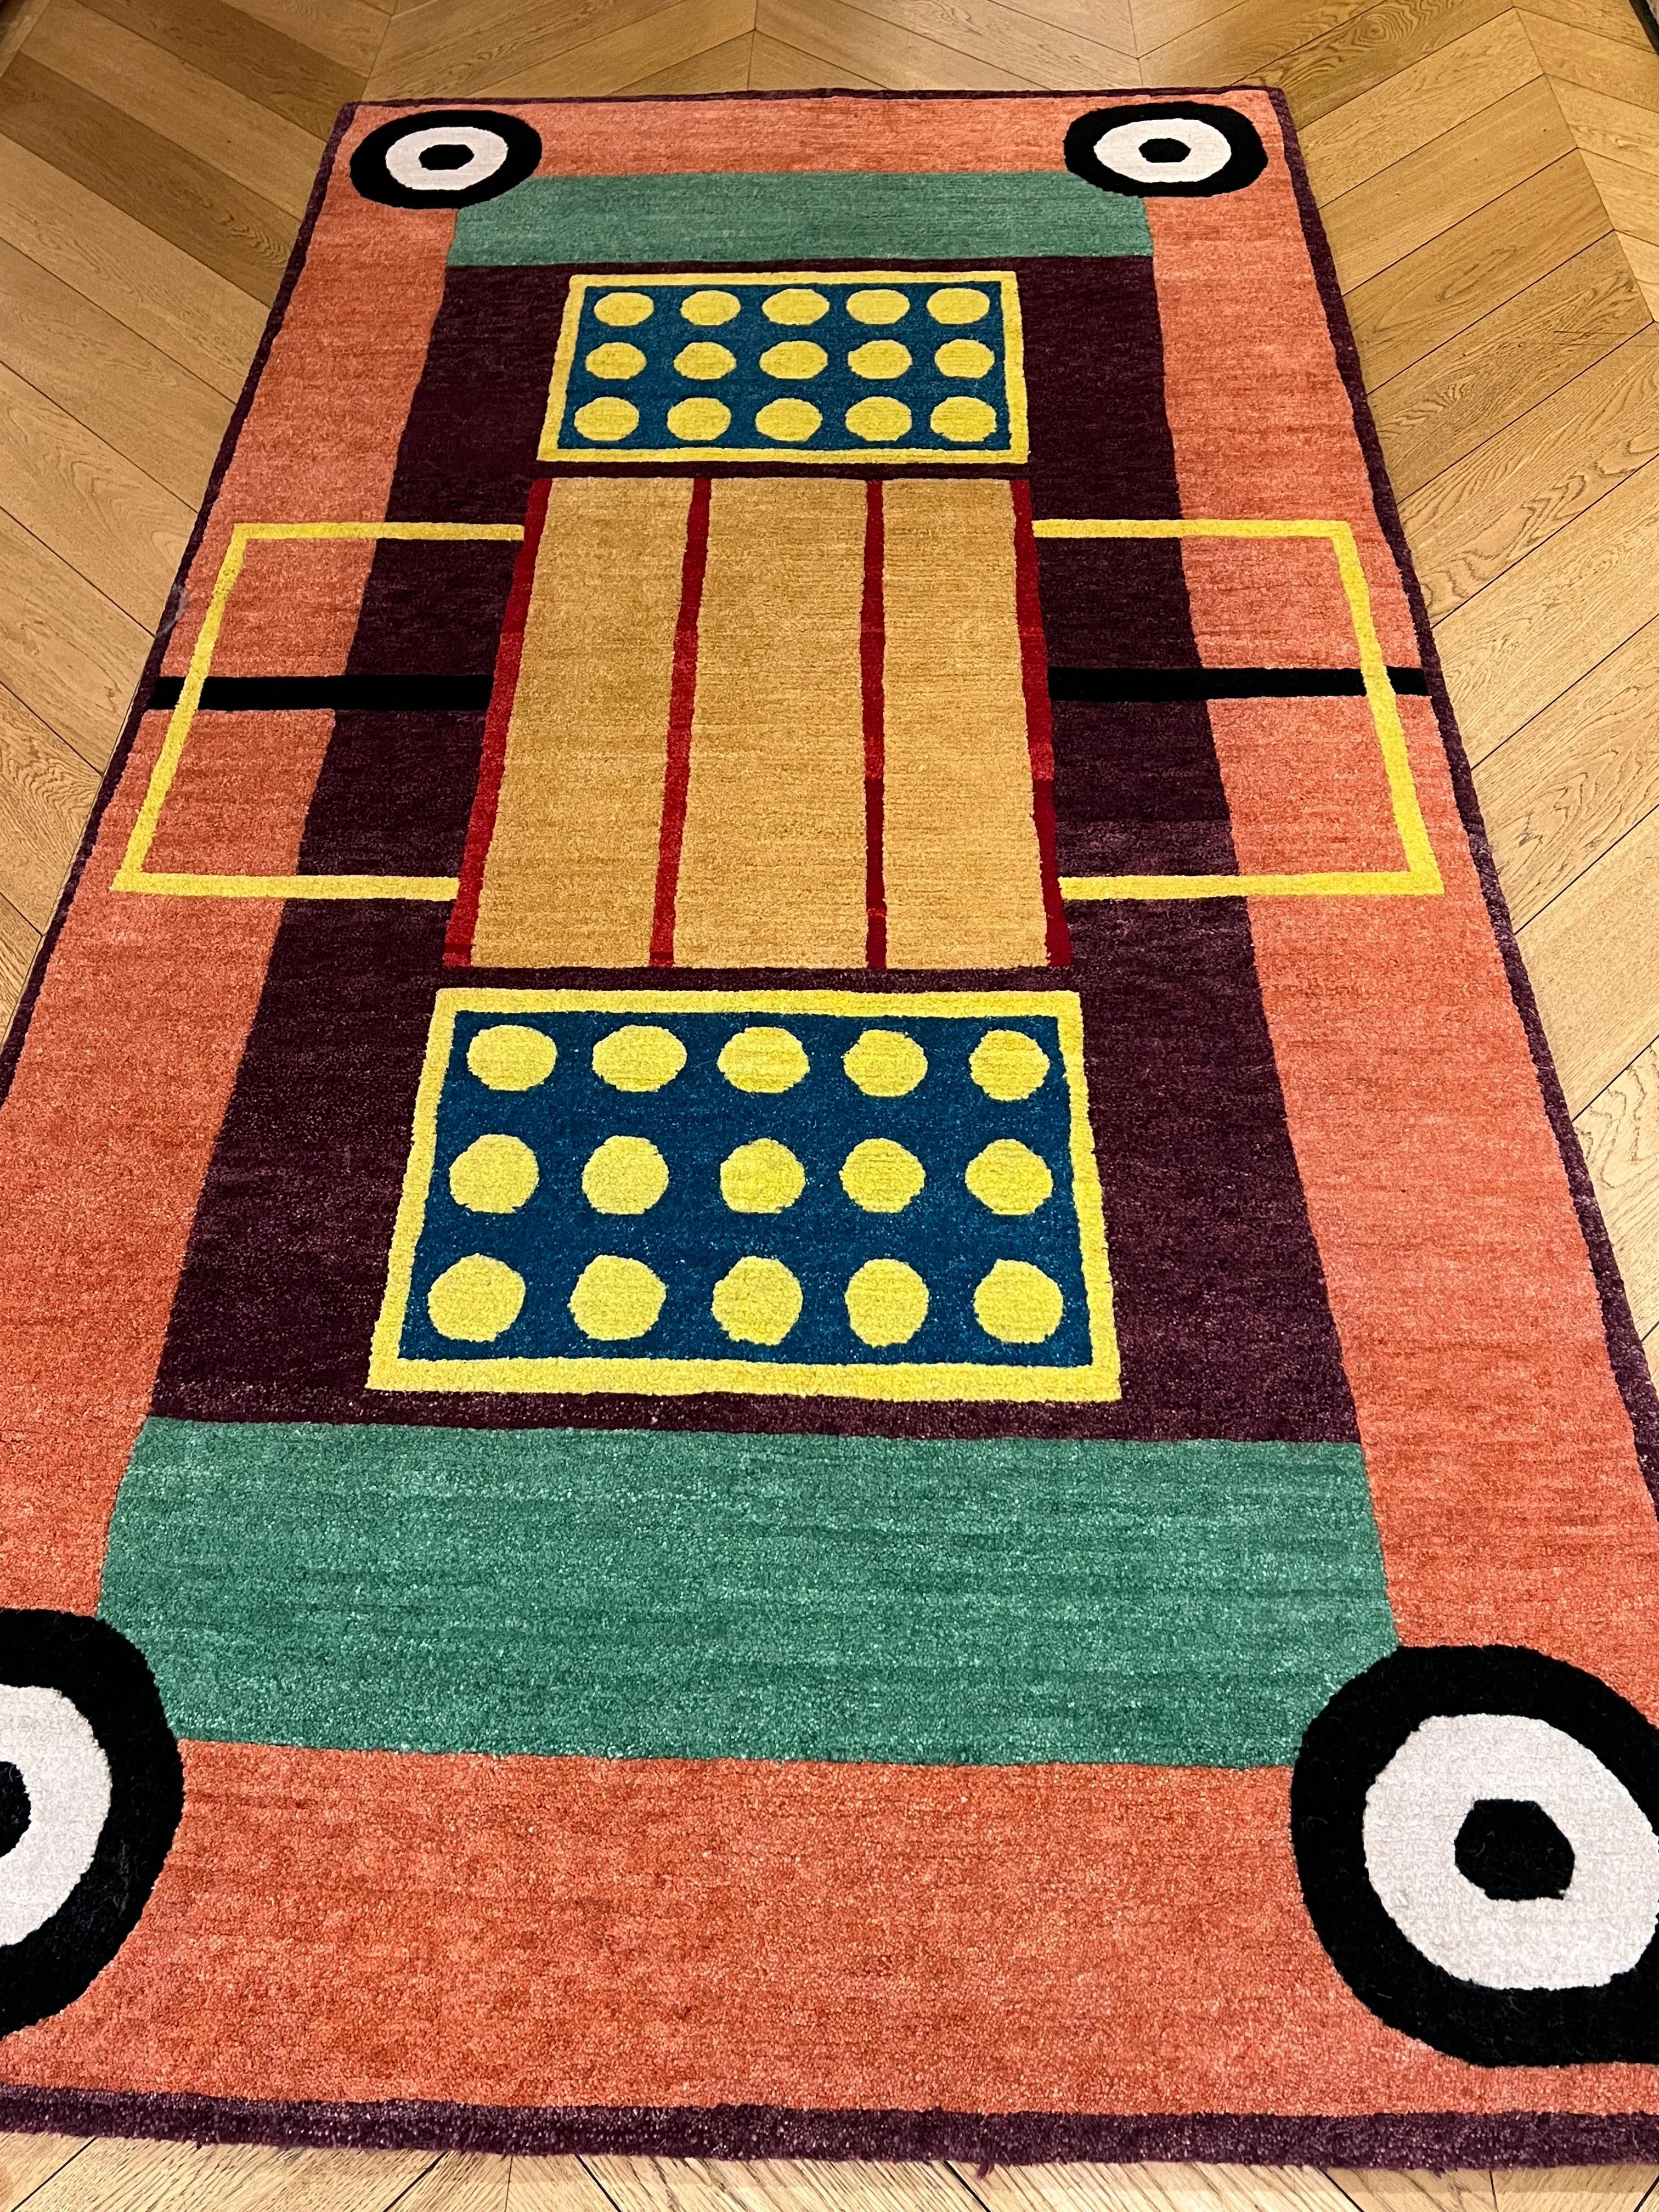 20th Century Rug Nathalie Du Pasquier 2003 Limited Edition In Excellent Condition For Sale In Firenze, IT